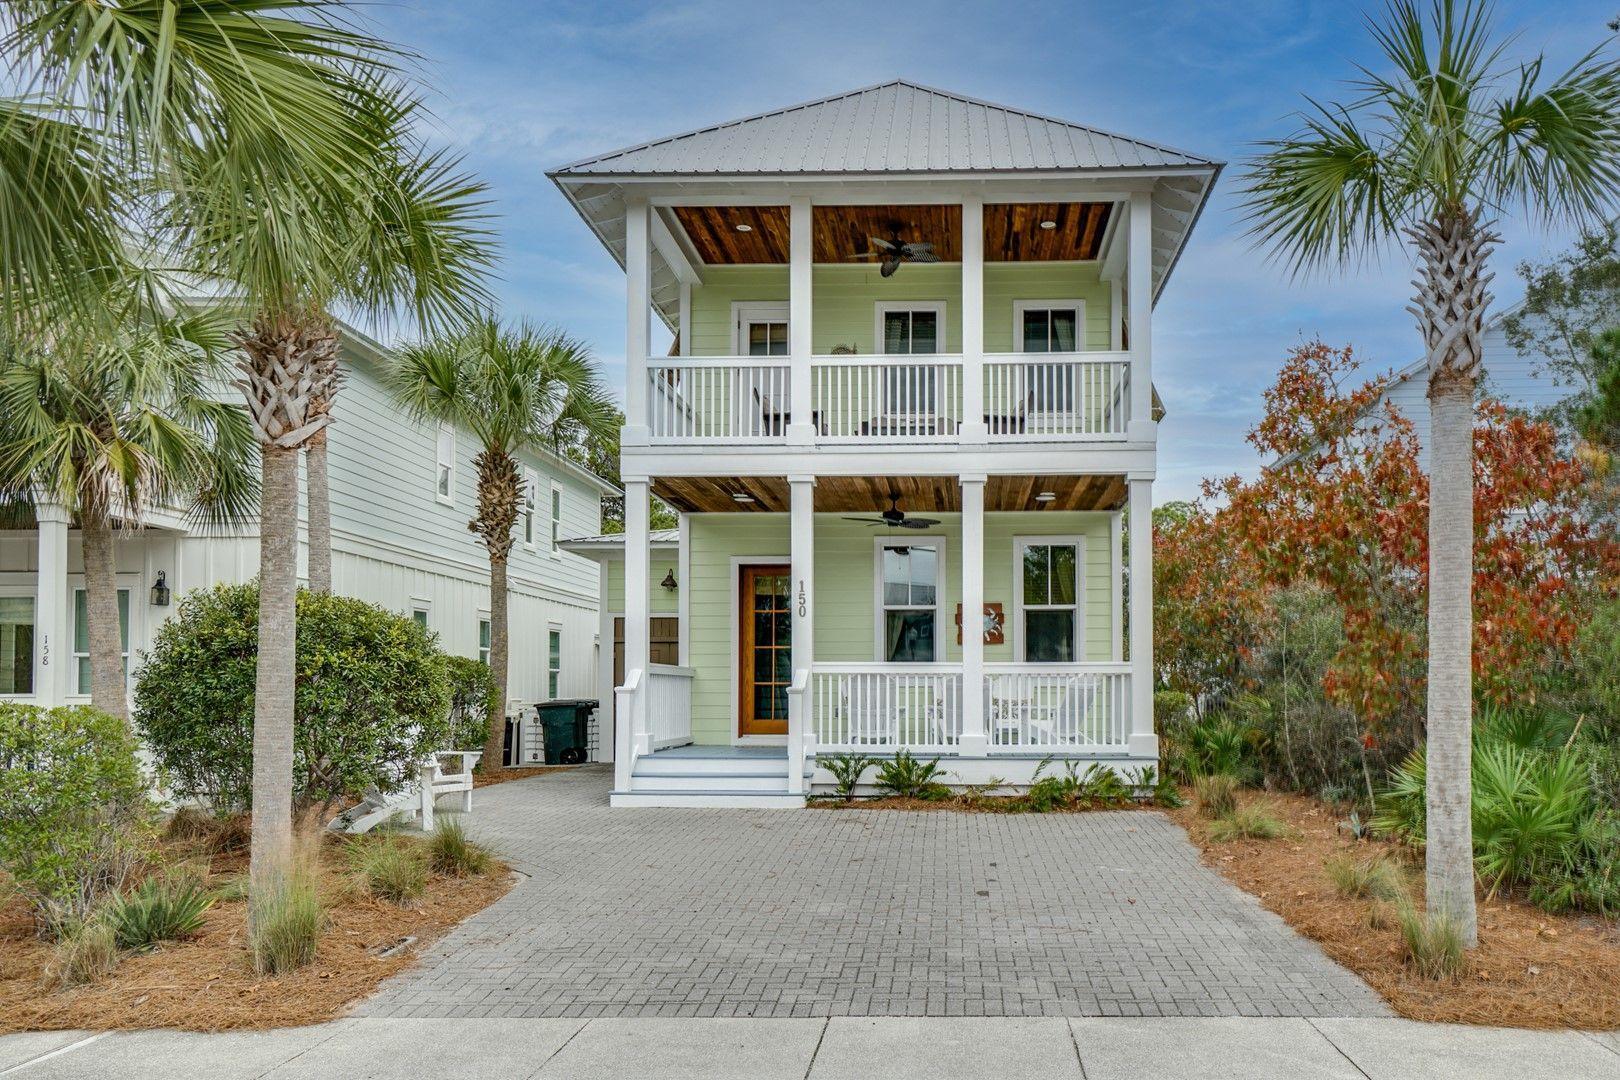 30A Beach House - The Snazzy Crab